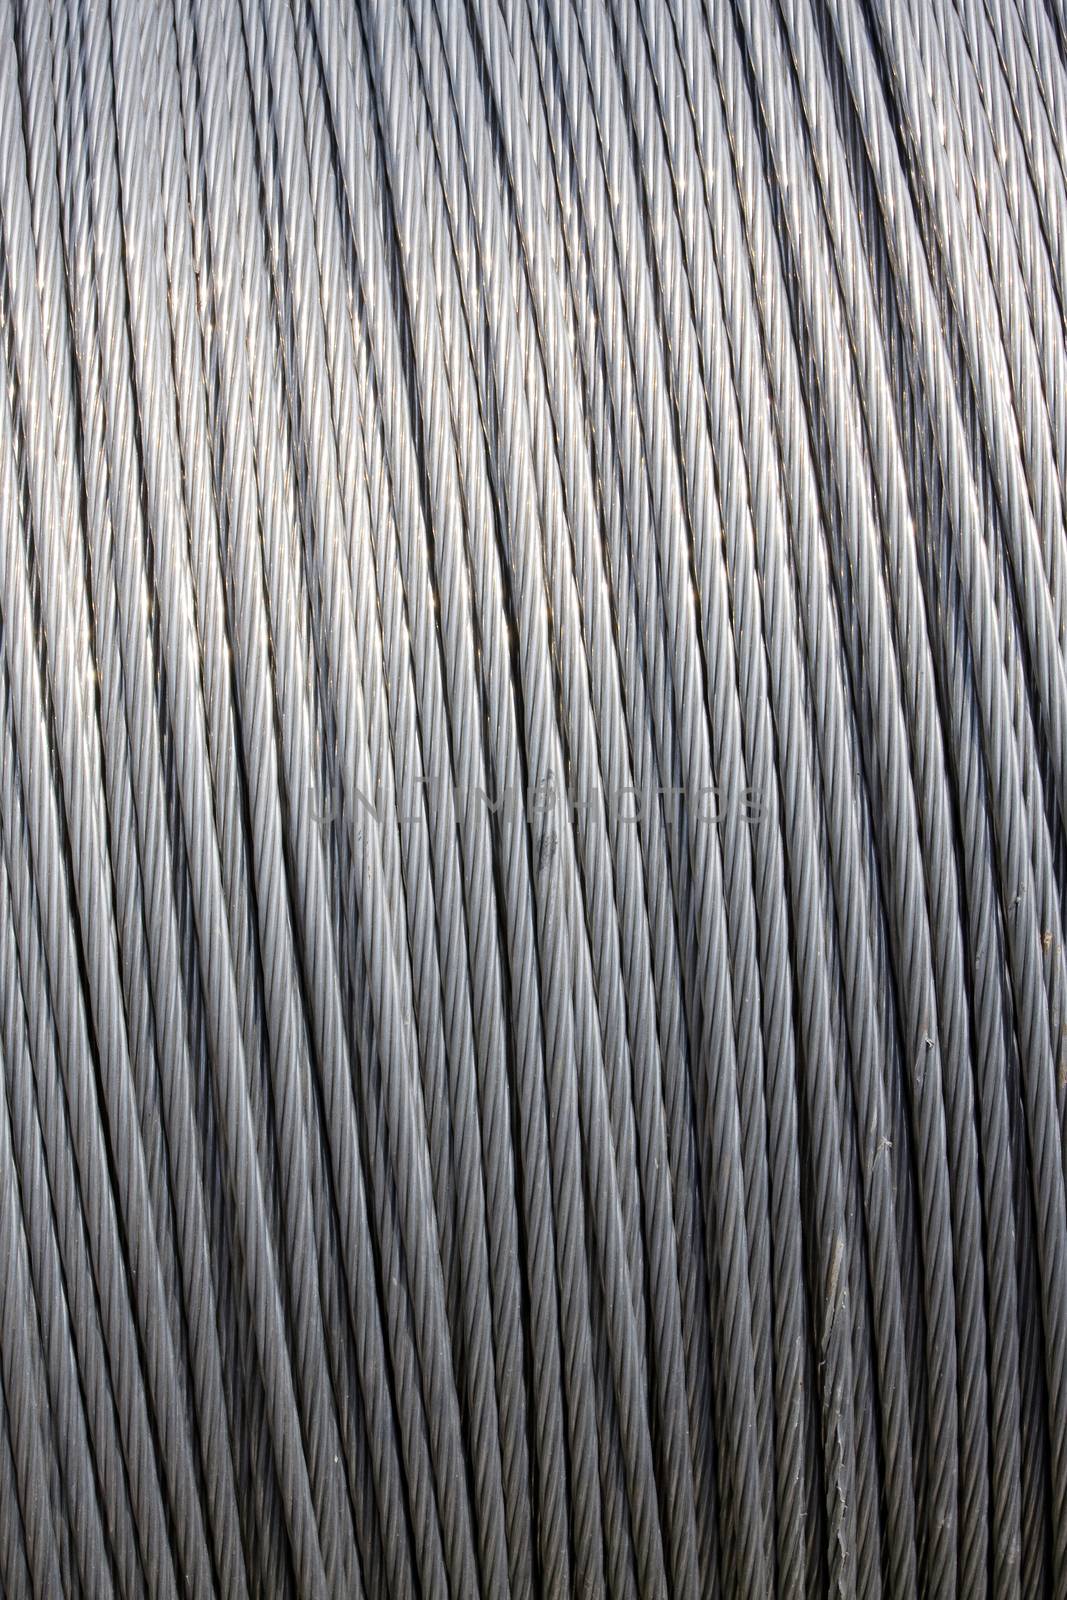 Steel wire cable background texture by myyaym